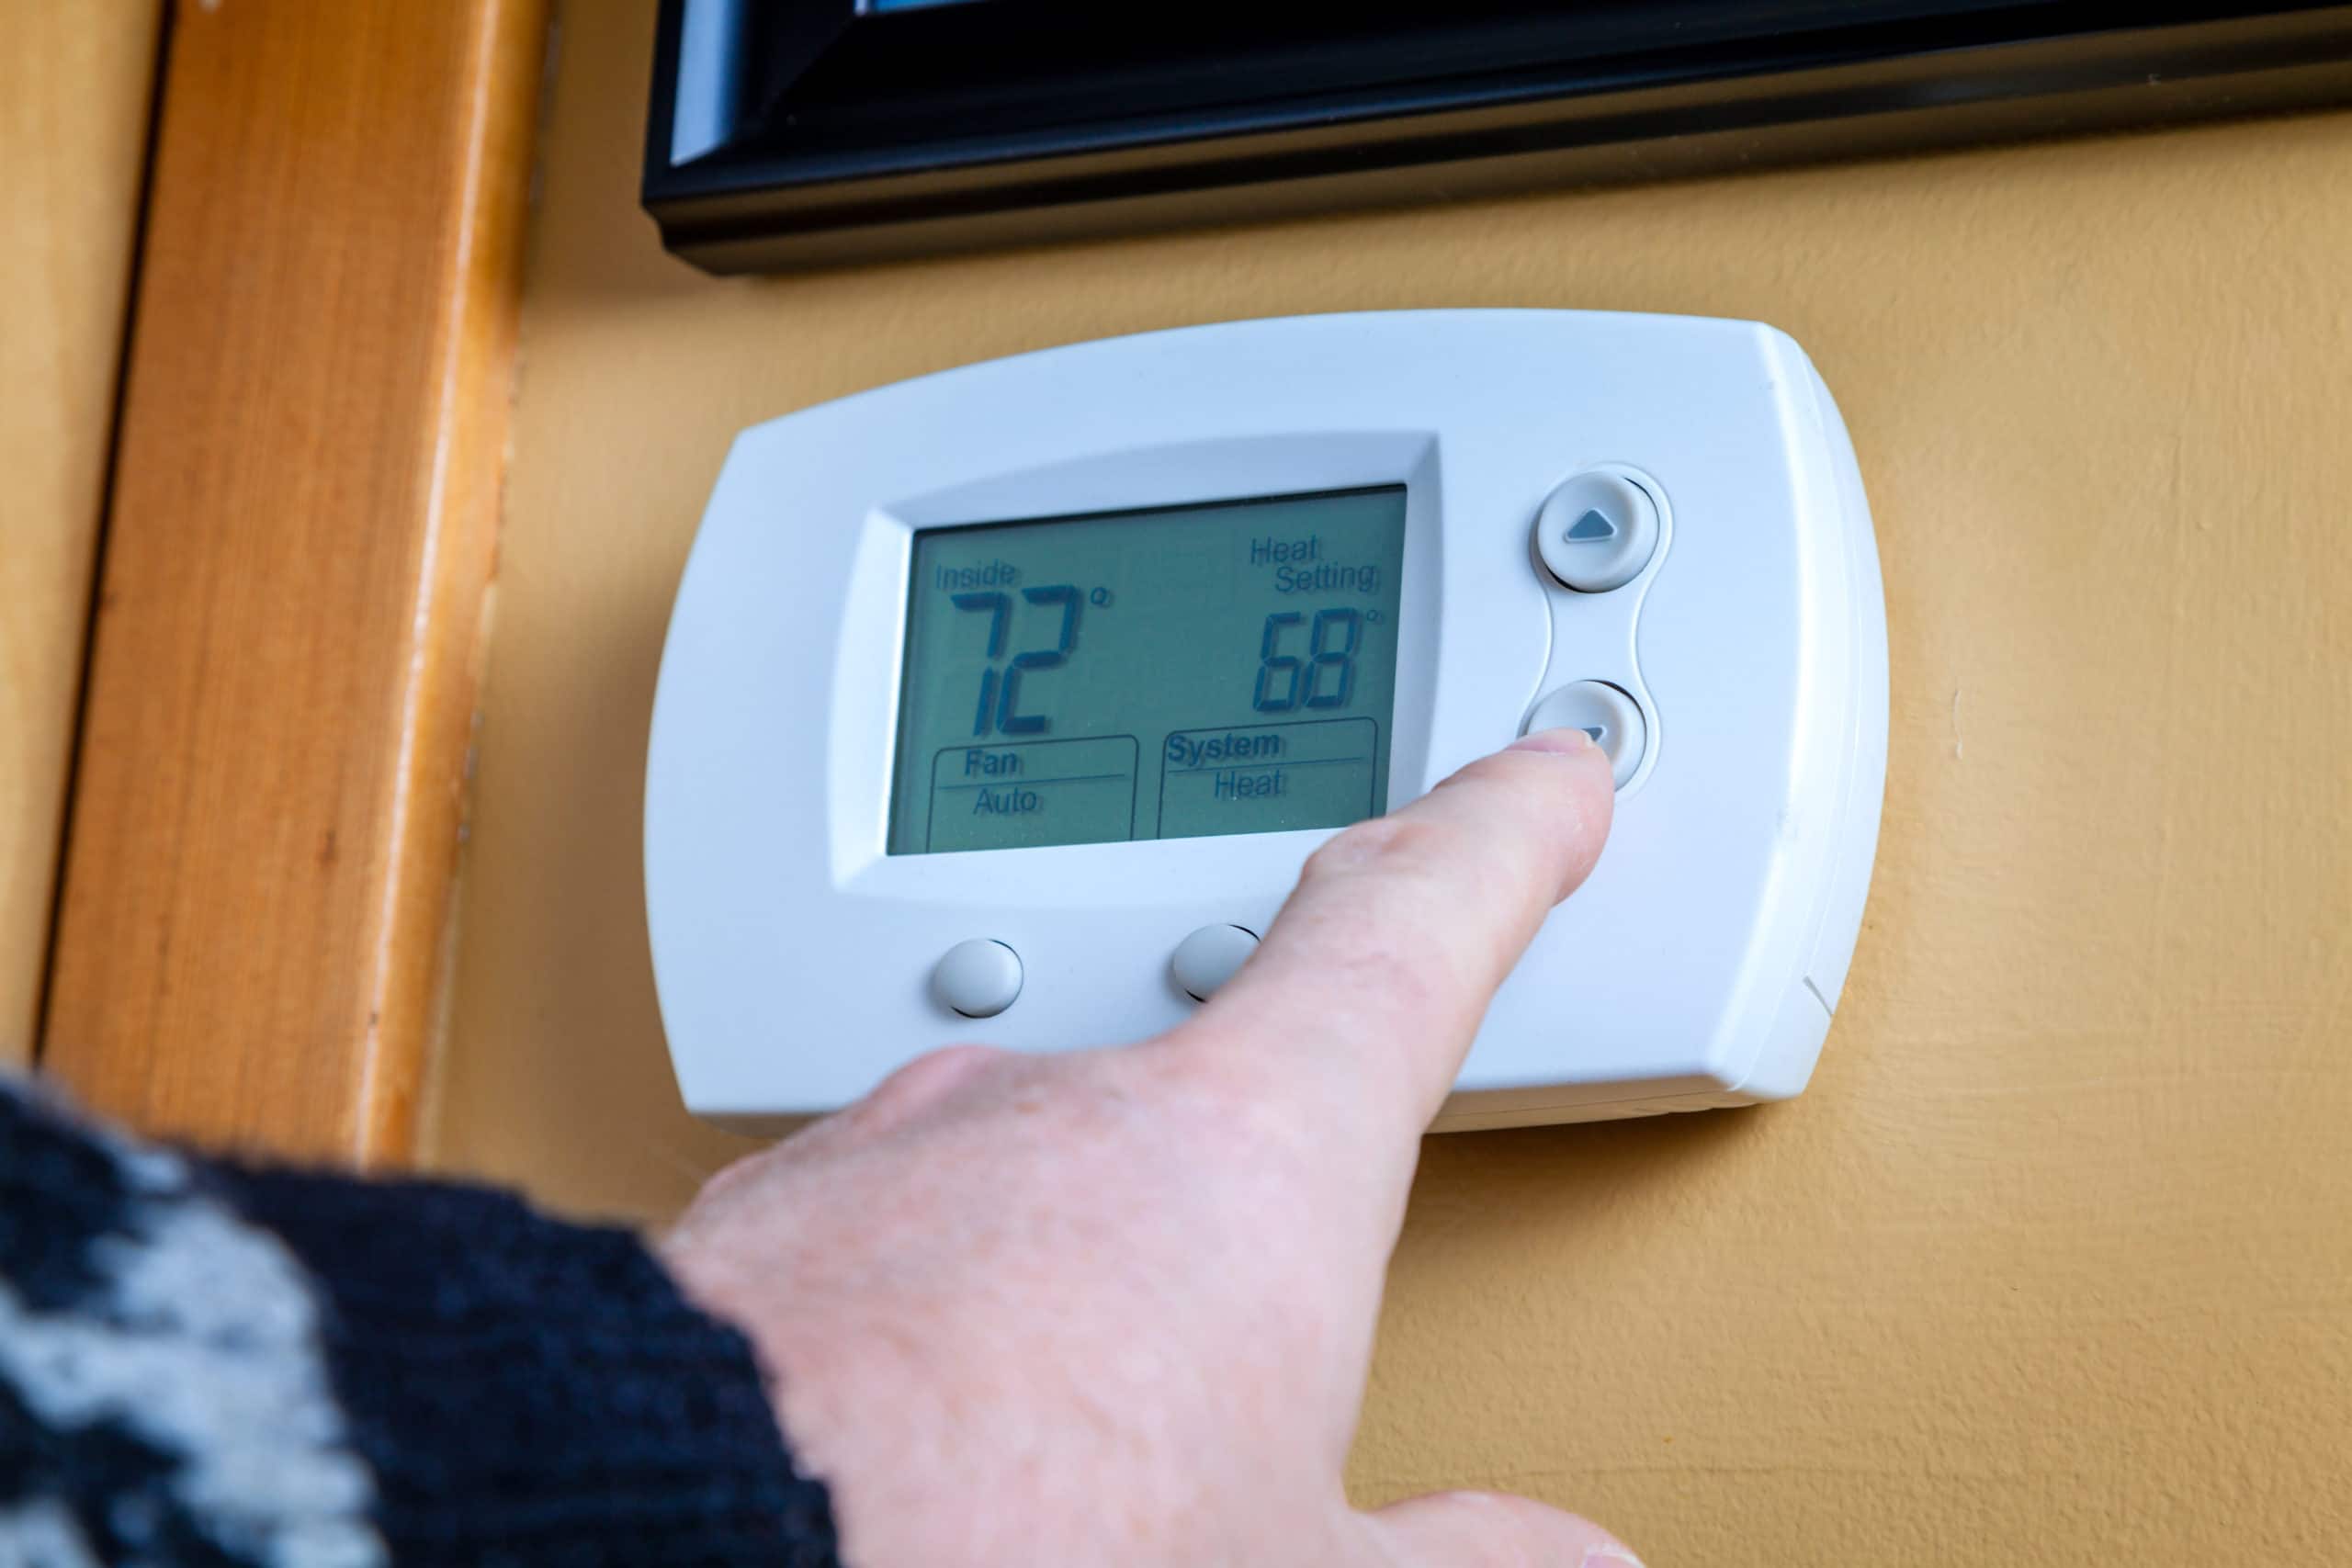 where-should-i-set-my-thermostat-temperature-patrol